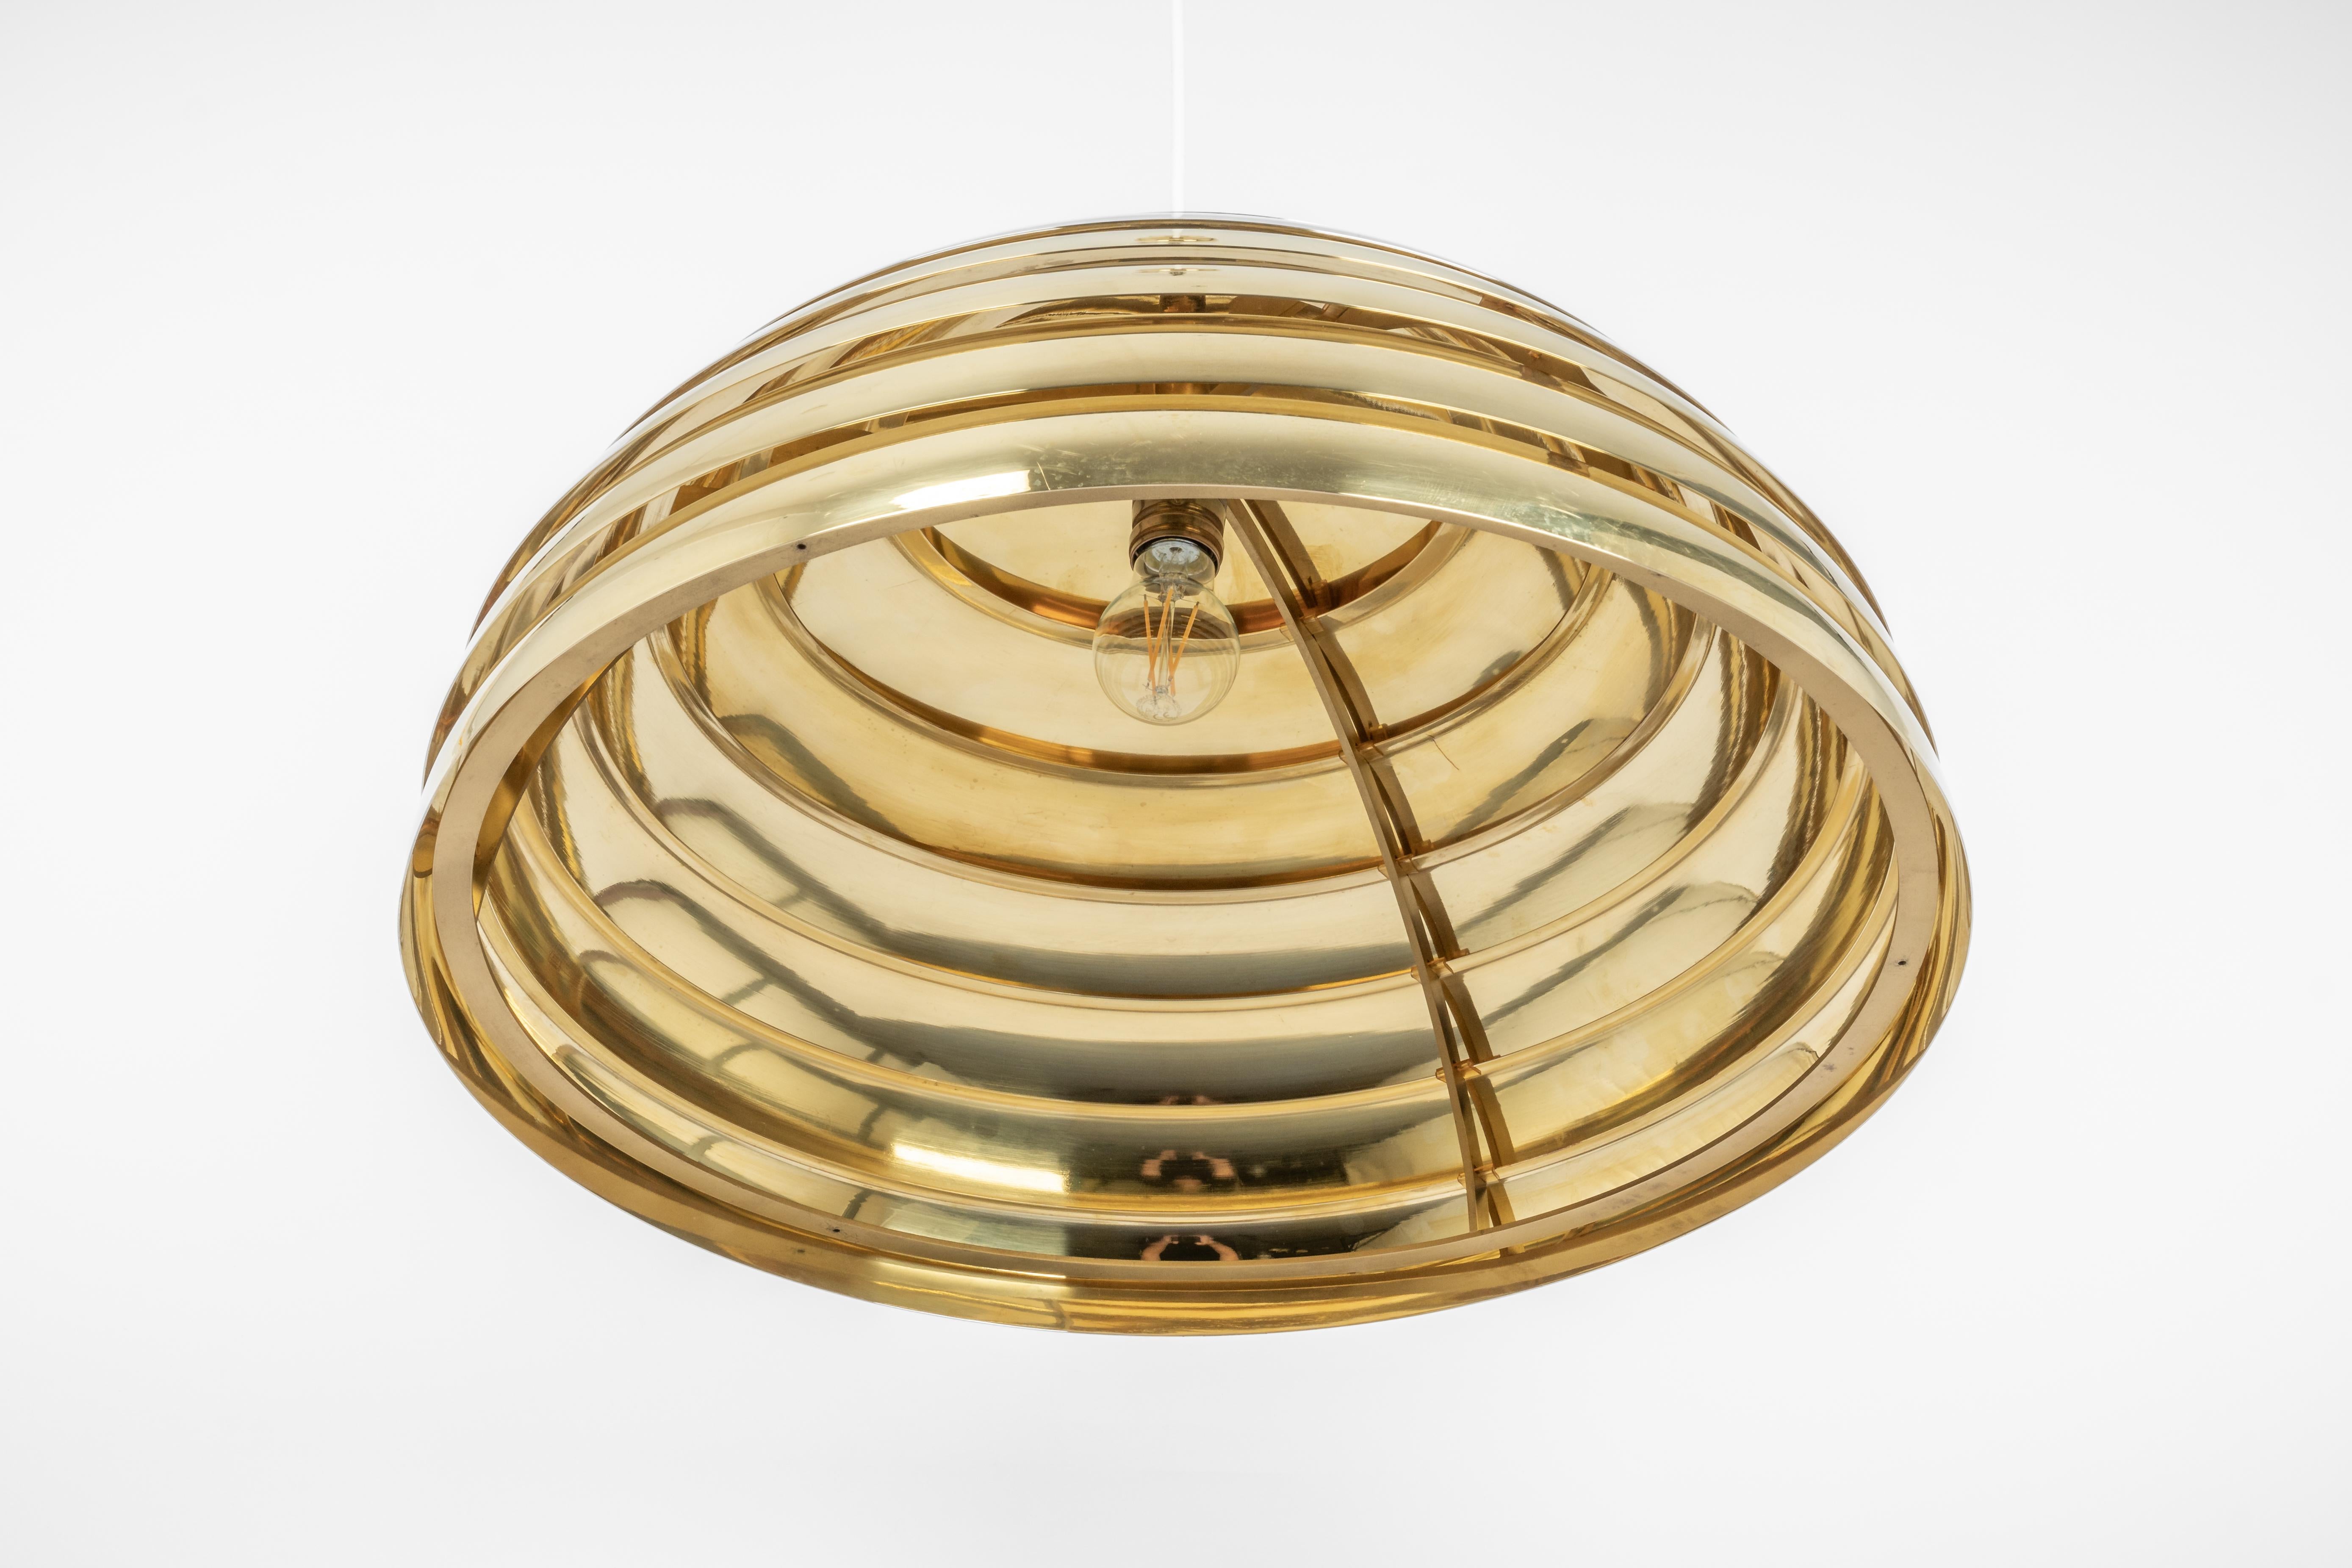 Large brass pendant light designed by Florian Schulz, Germany, 1970s.

High quality and in very good condition. Cleaned, well-wired and ready to use. 

The fixture requires one standard bulb
Light bulbs are not included. It is possible to